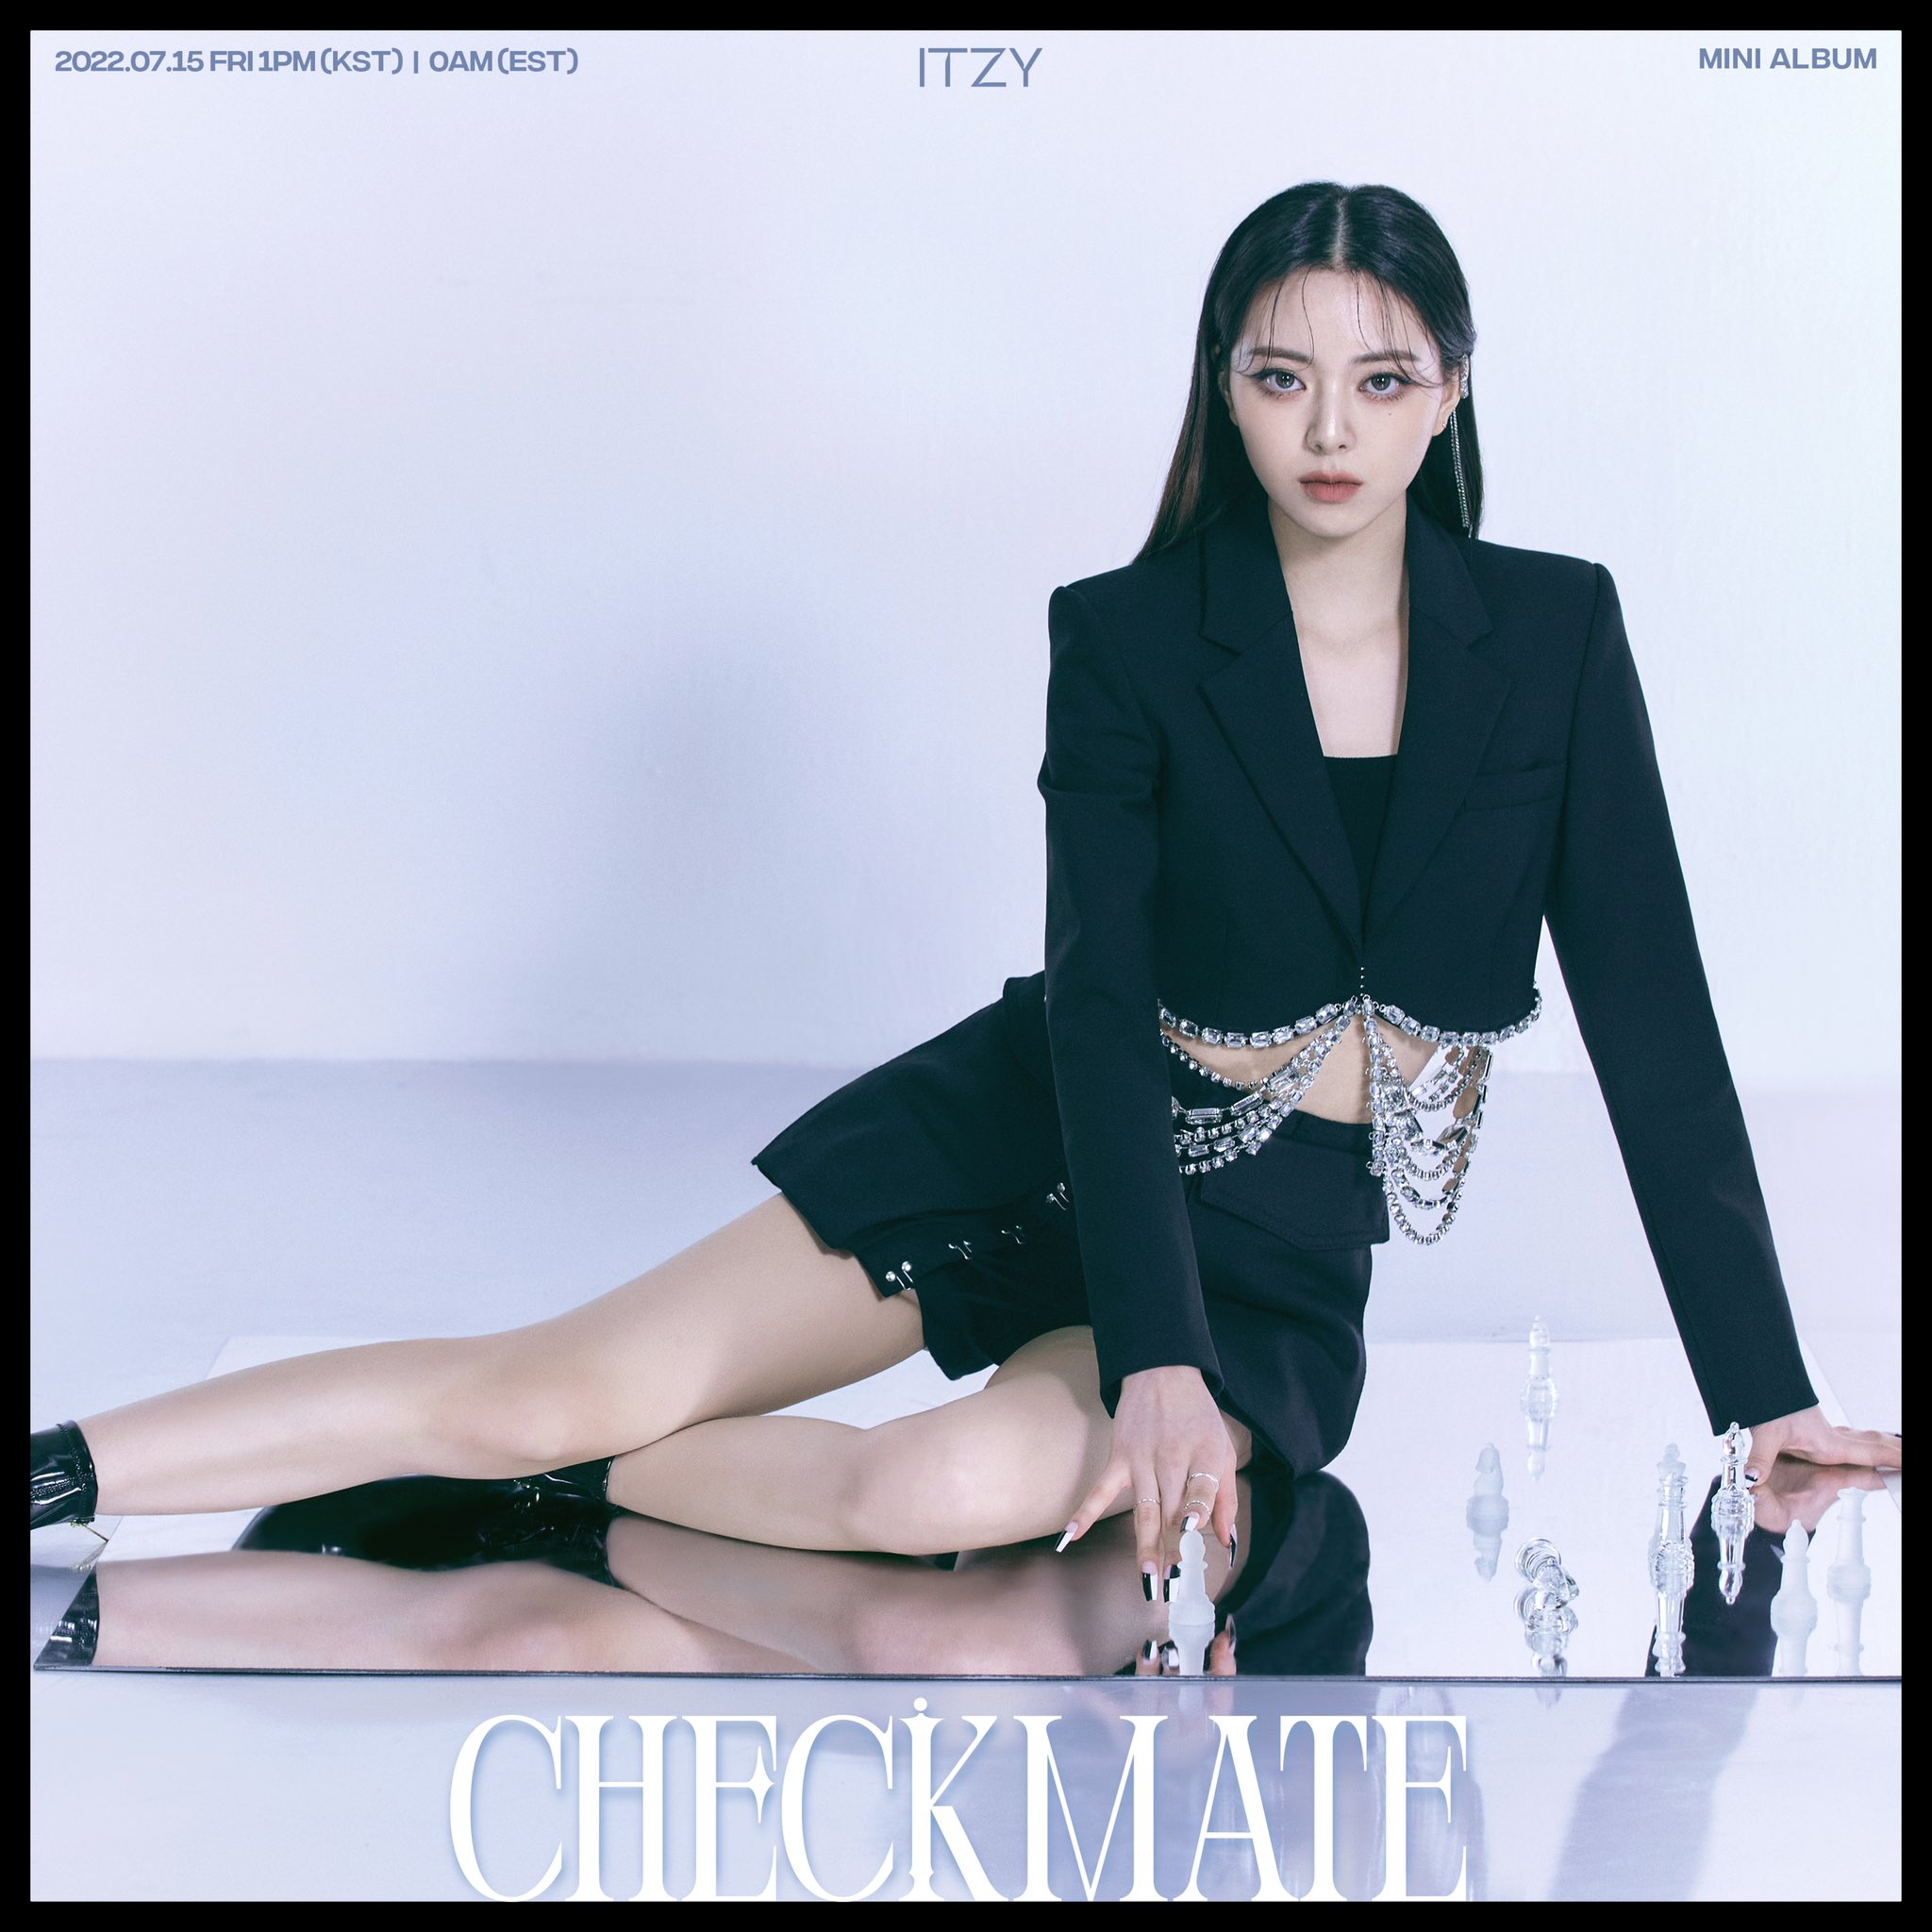 Checkmate (ITZY)